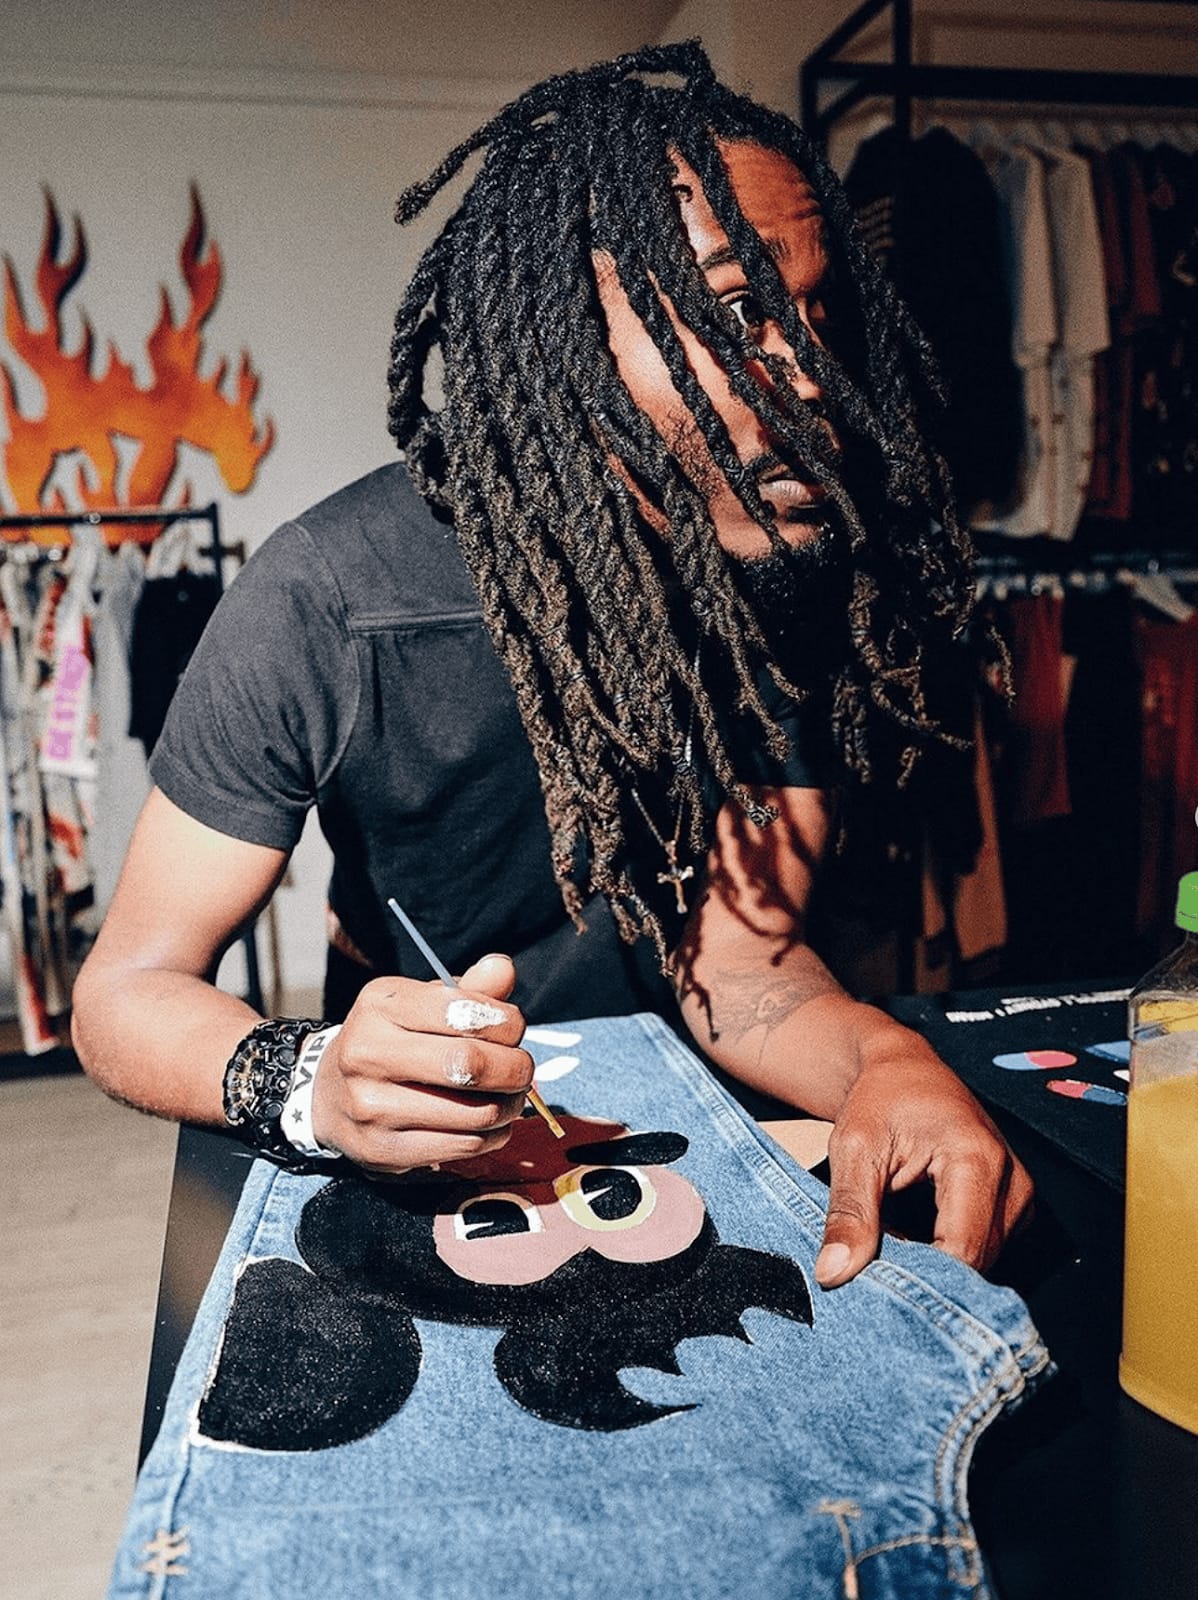 A photograph of an artist hand-painting a Mickey Mouse character onto a pair of blue denim jeans